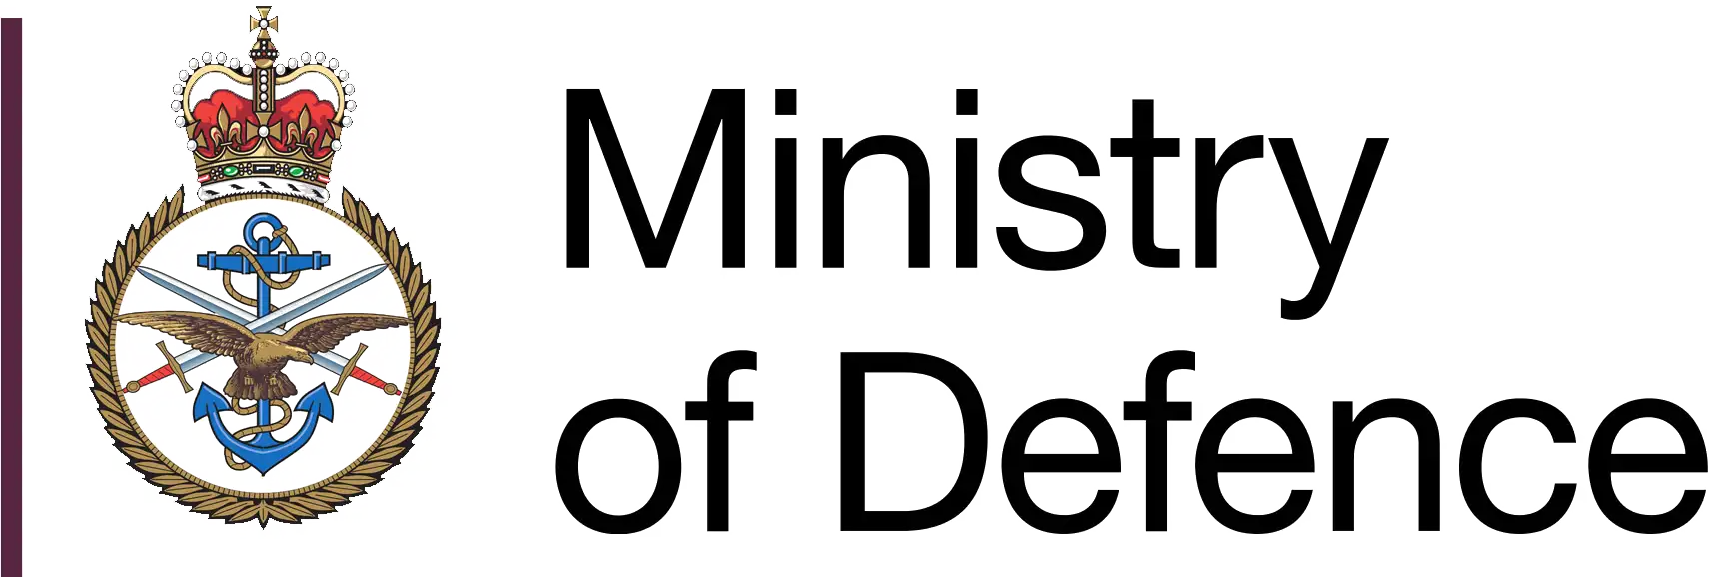 UK Ministry of Defence